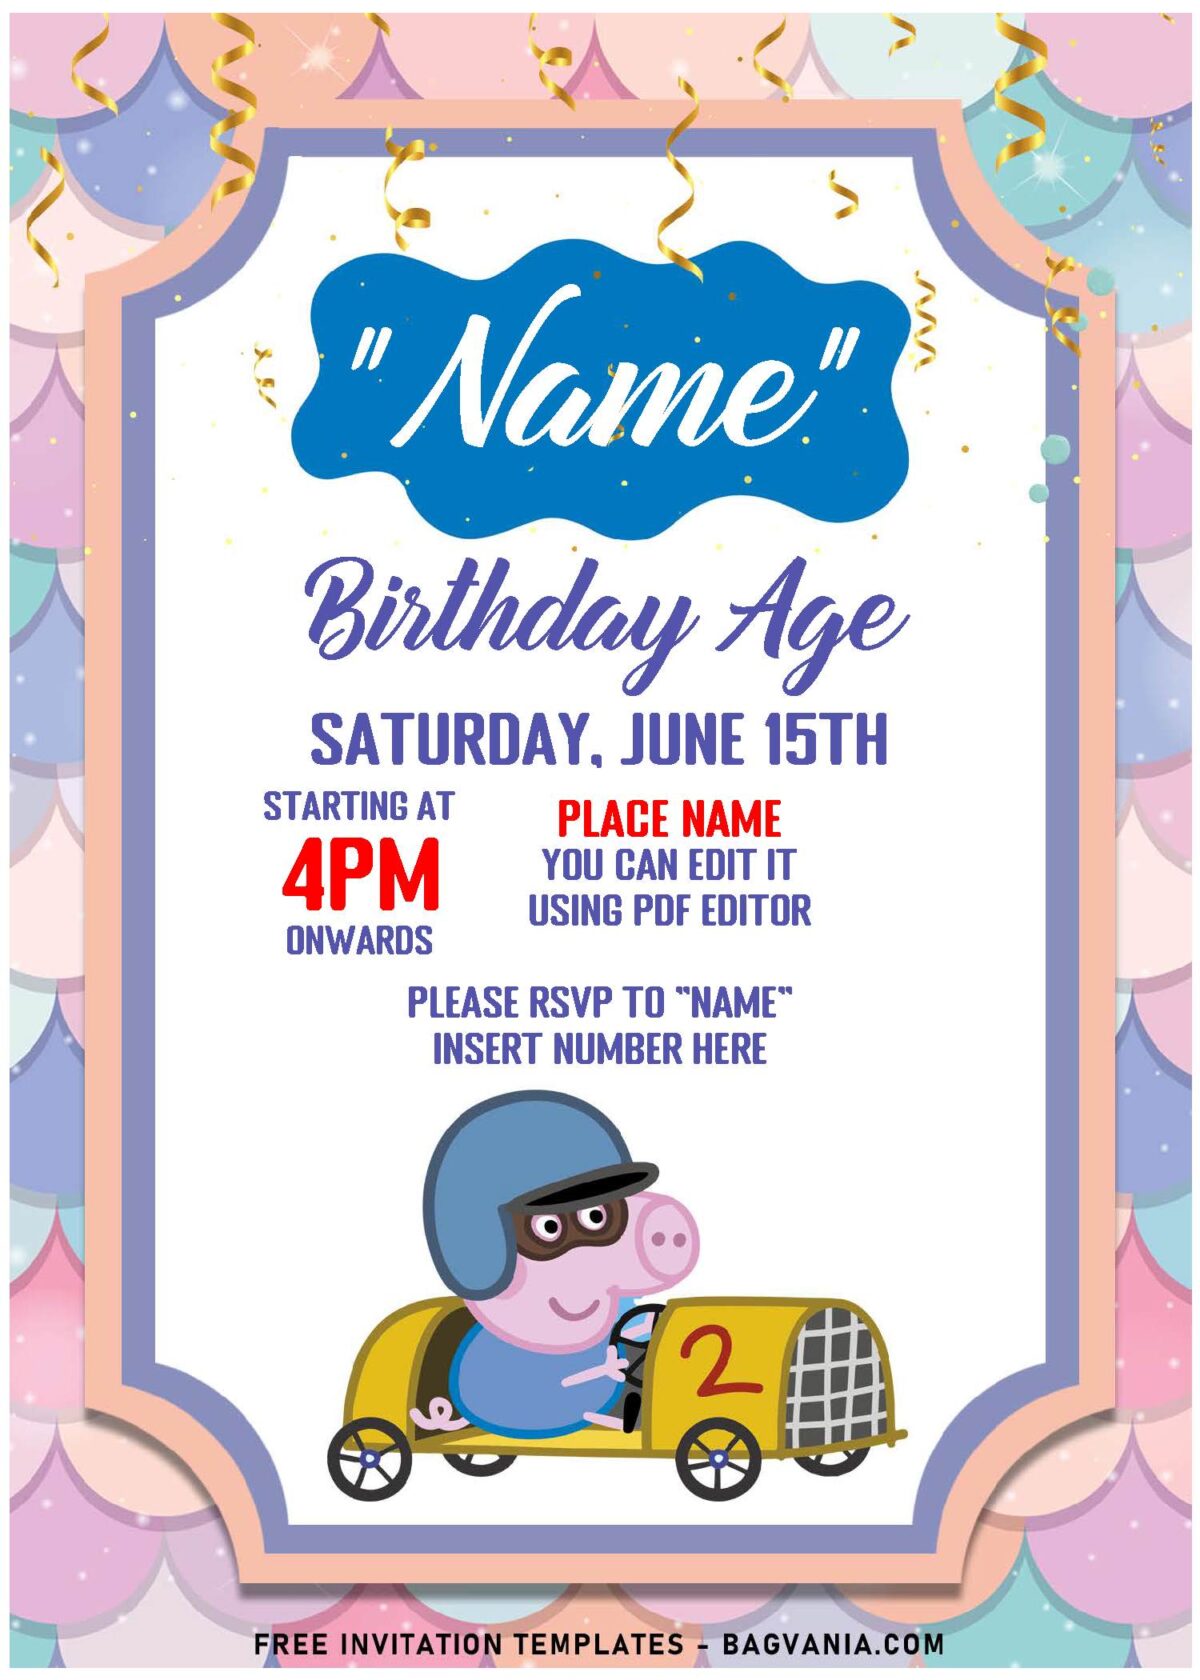 (Free Editable PDF) Peppa Pig Party Time Birthday Invitation Templates with adorable pink background